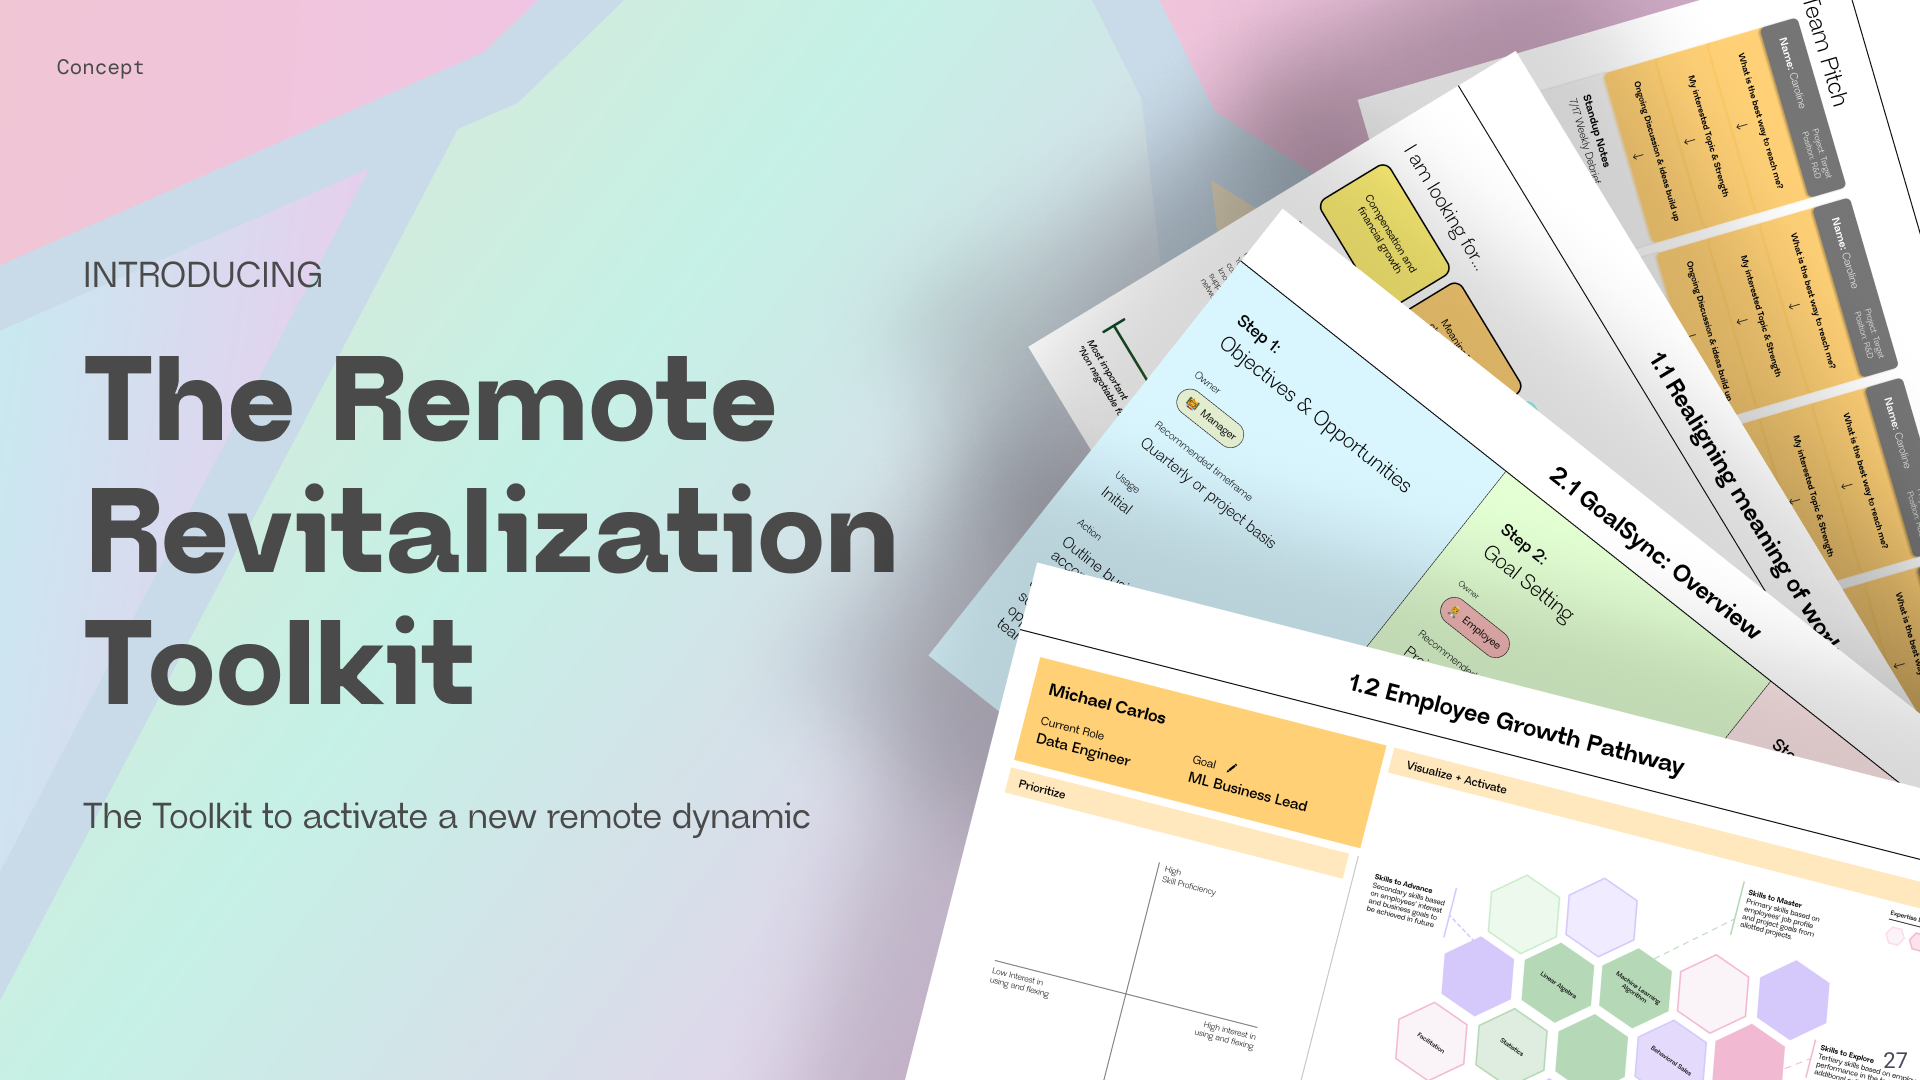 The Remote Revitalization Toolkit